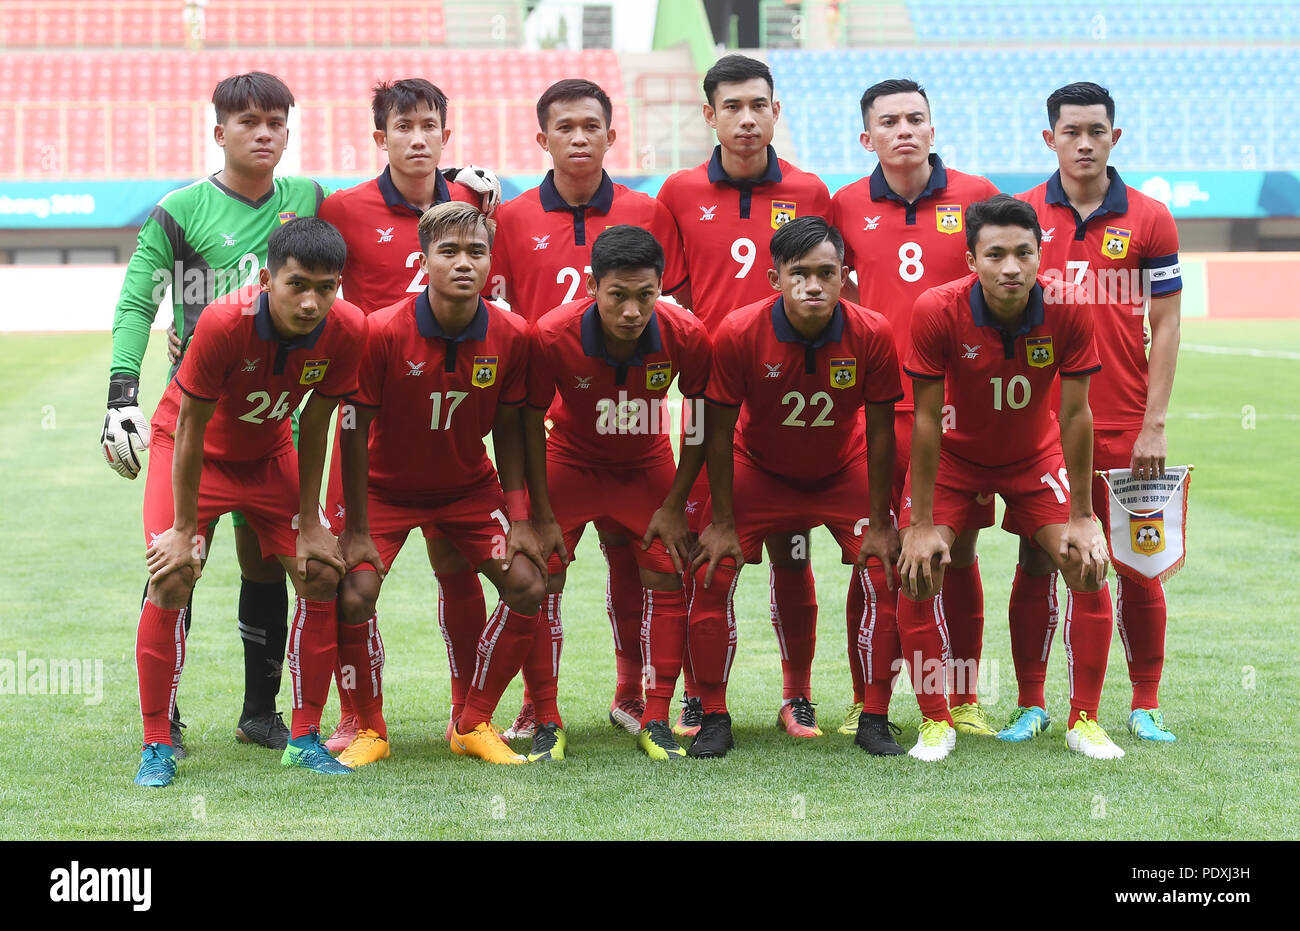 Bekasi, Indonesia. 10th Aug, 2018. Players of Laos pose for a team photo before the Men's Football Group A match between Hong Kong of China and Laos at the 18th Asian Games at Patriot Stadium in Bekasi, Indonesia, Aug. 10, 2018. Credit: Jia Yuchen/Xinhua/Alamy Live News Stock Photo